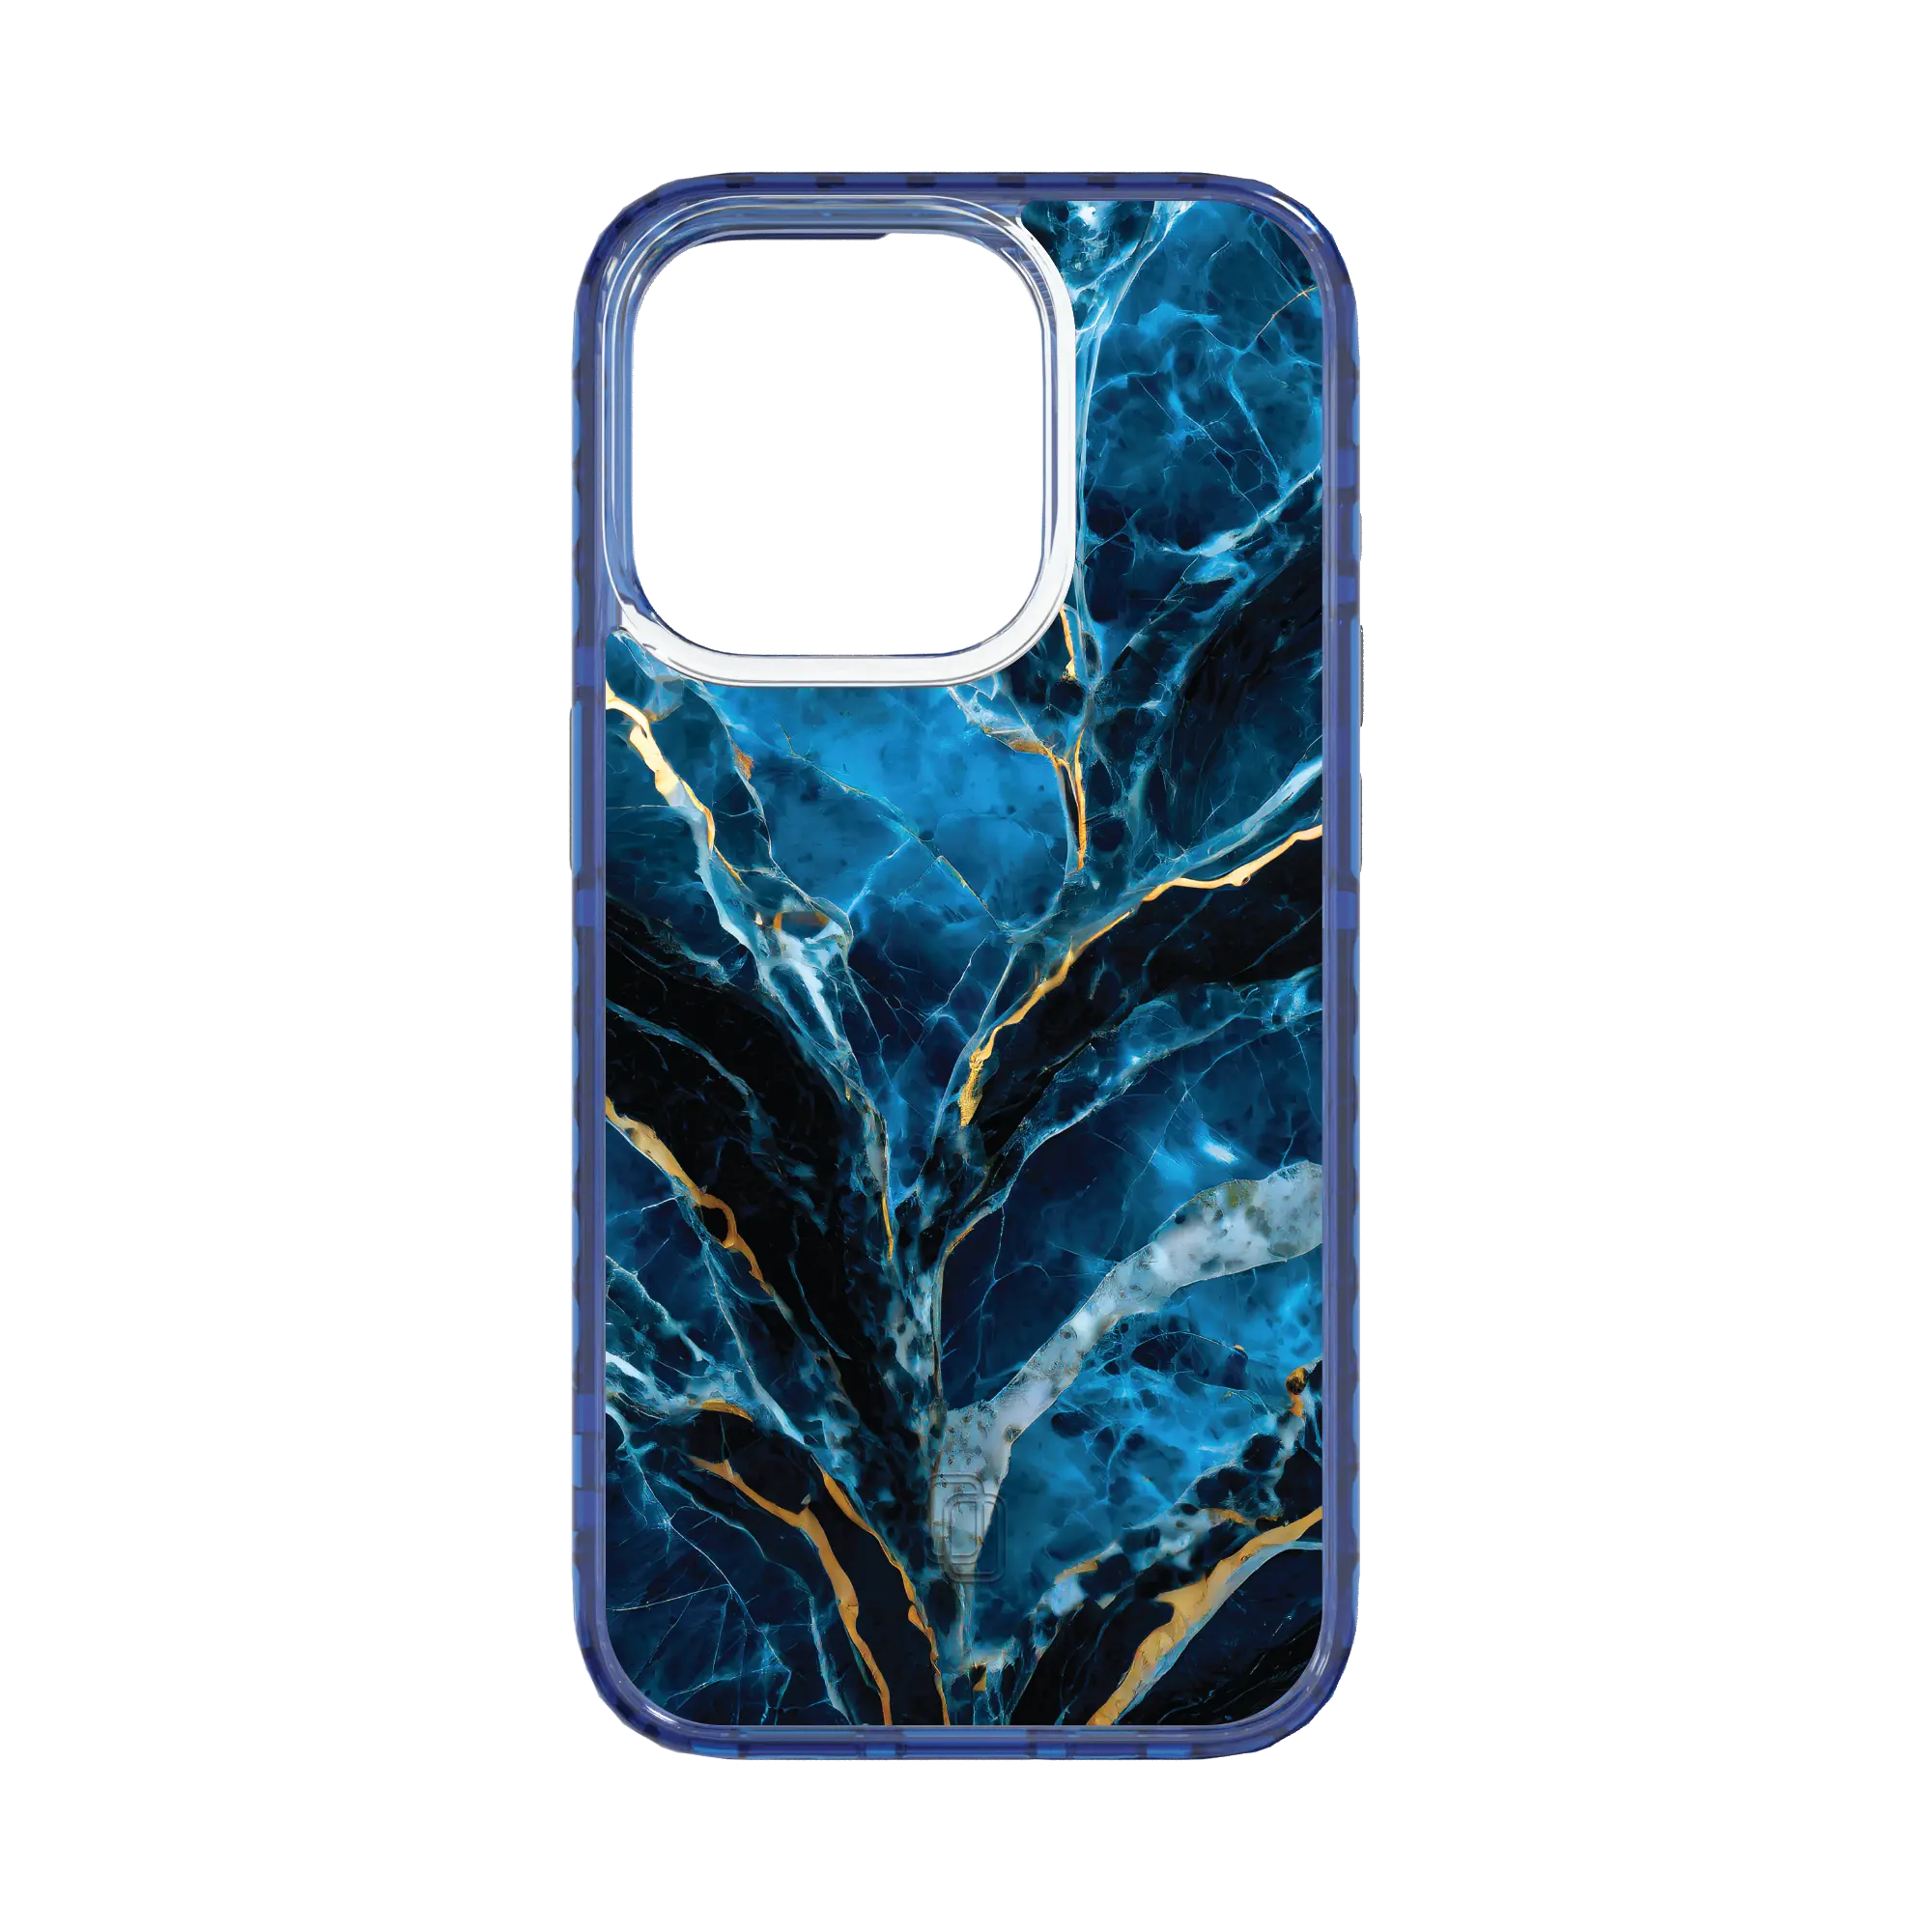 Apple-iPhone-15-Pro-Bermuda-Blue Deep Sea | Protective MagSafe Case | Marble Stone Series for Apple iPhone 15 Series cellhelmet cellhelmet